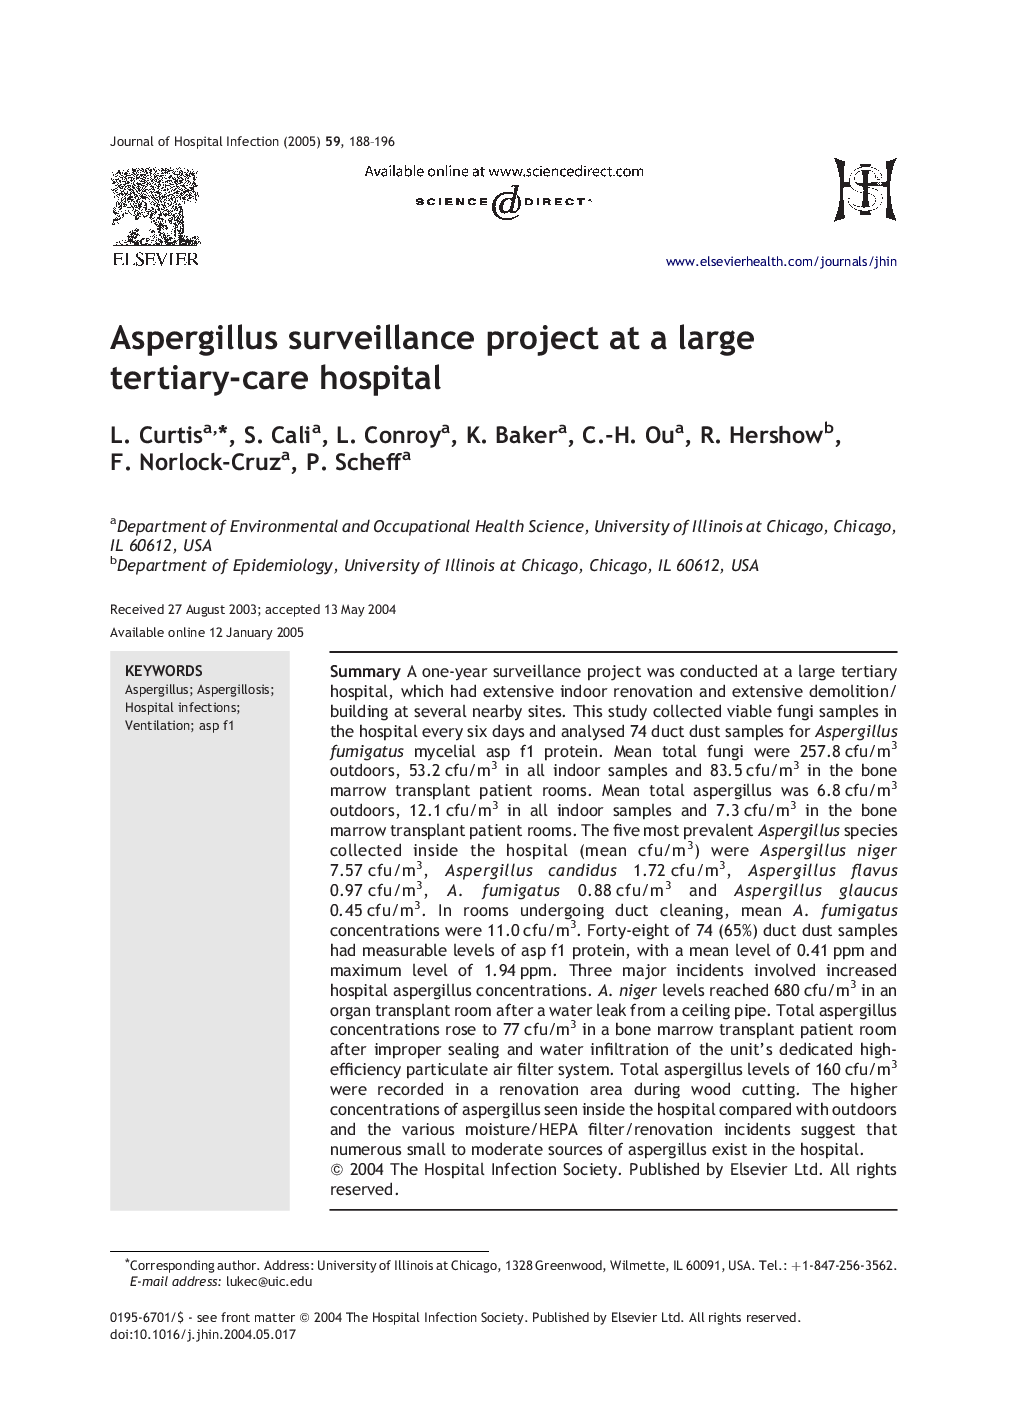 Aspergillus surveillance project at a large tertiary-care hospital